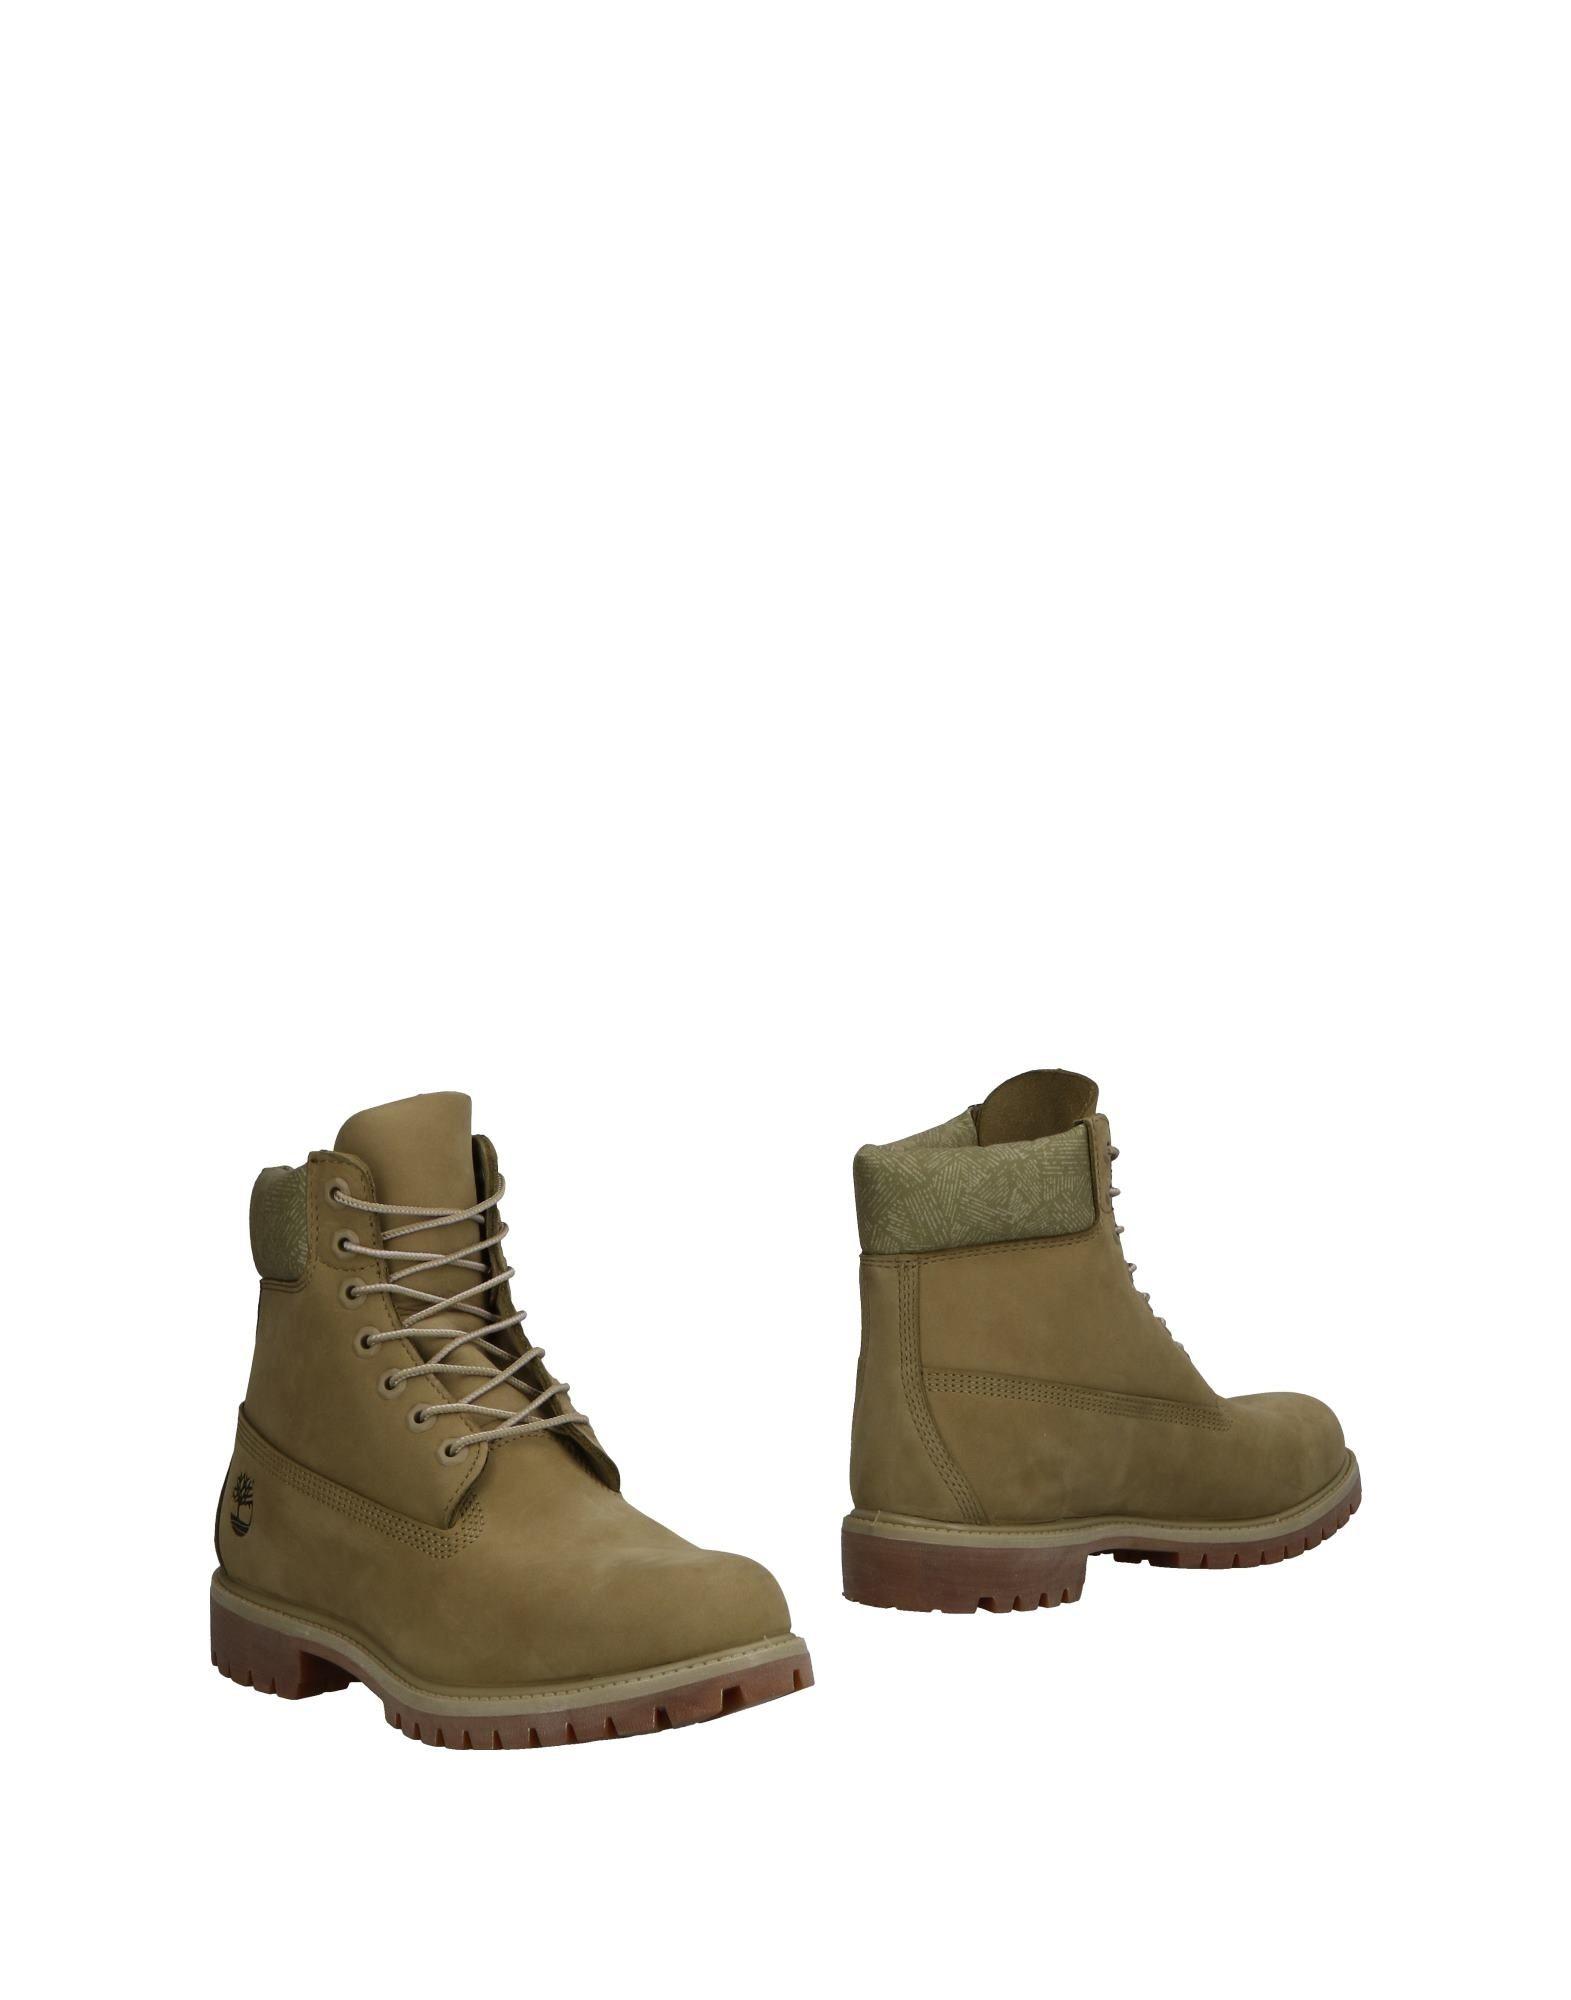 timberland boots military green